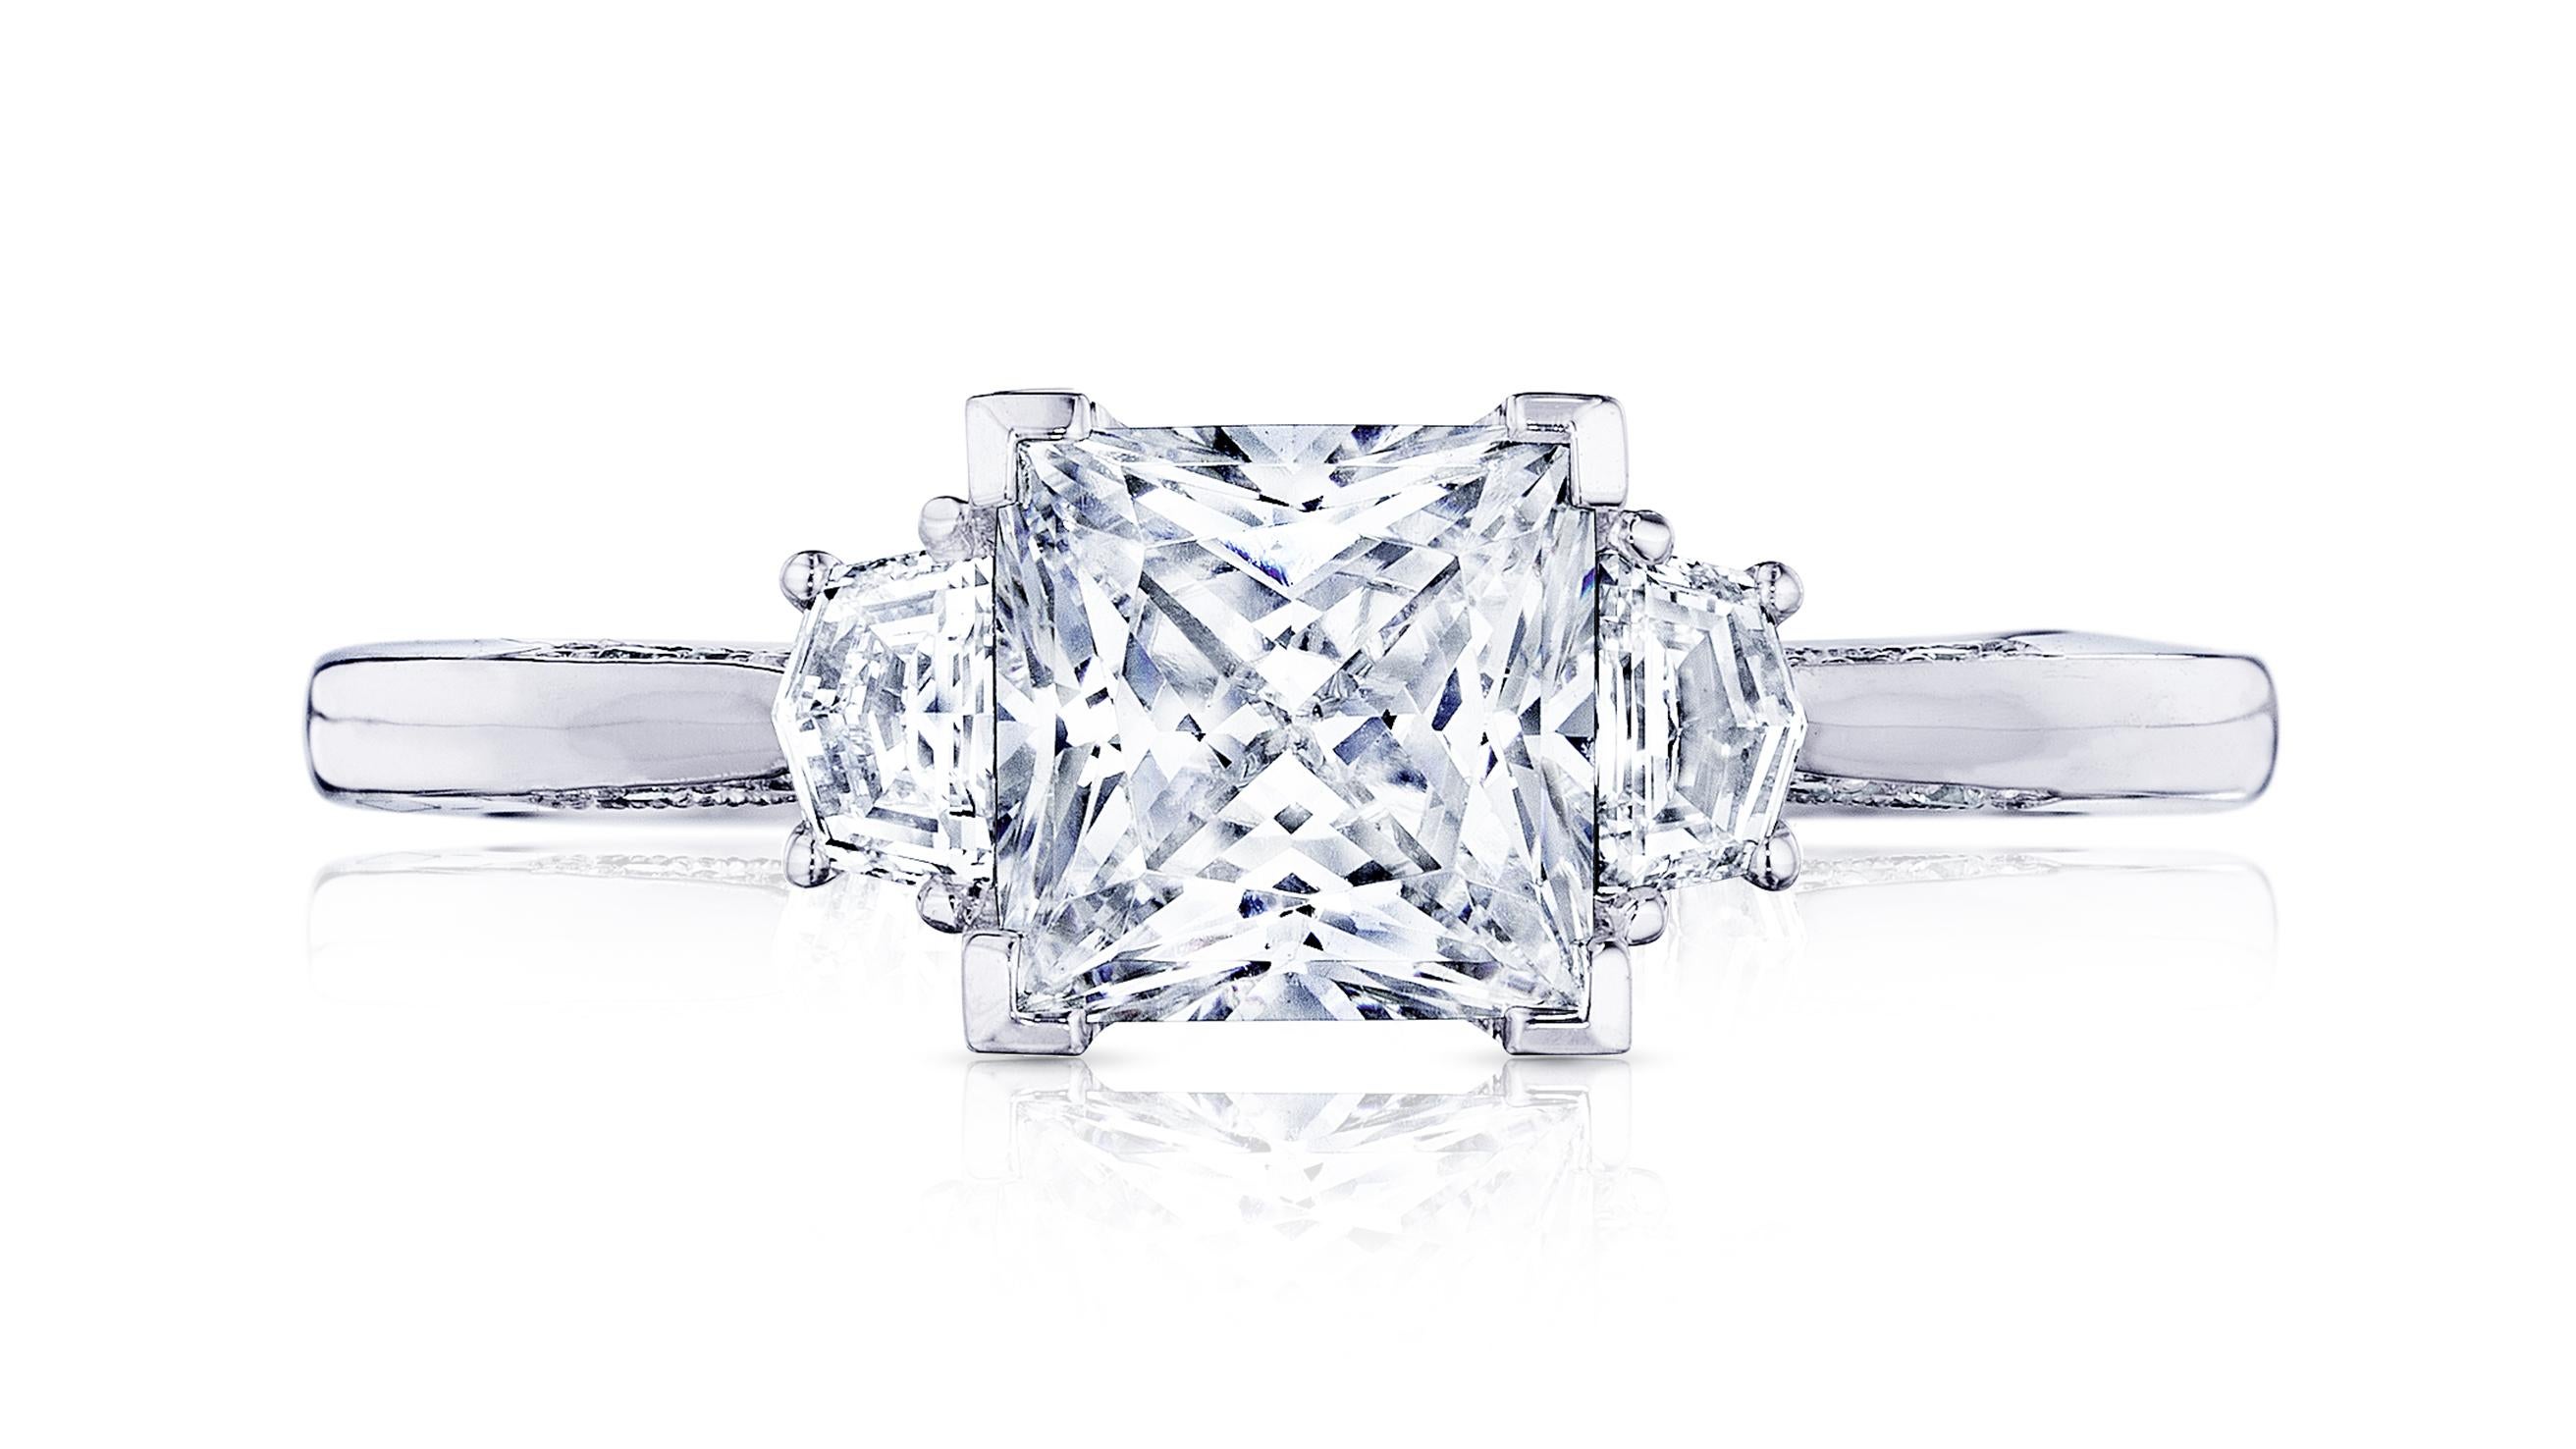 An exceptional engagement ring and sparkling precious jewel, features a round brilliant diamond center stone, given prominence by two tapered trapezoid side stones on a delicate platinum band. The delicate details of this refined diamond jewelry